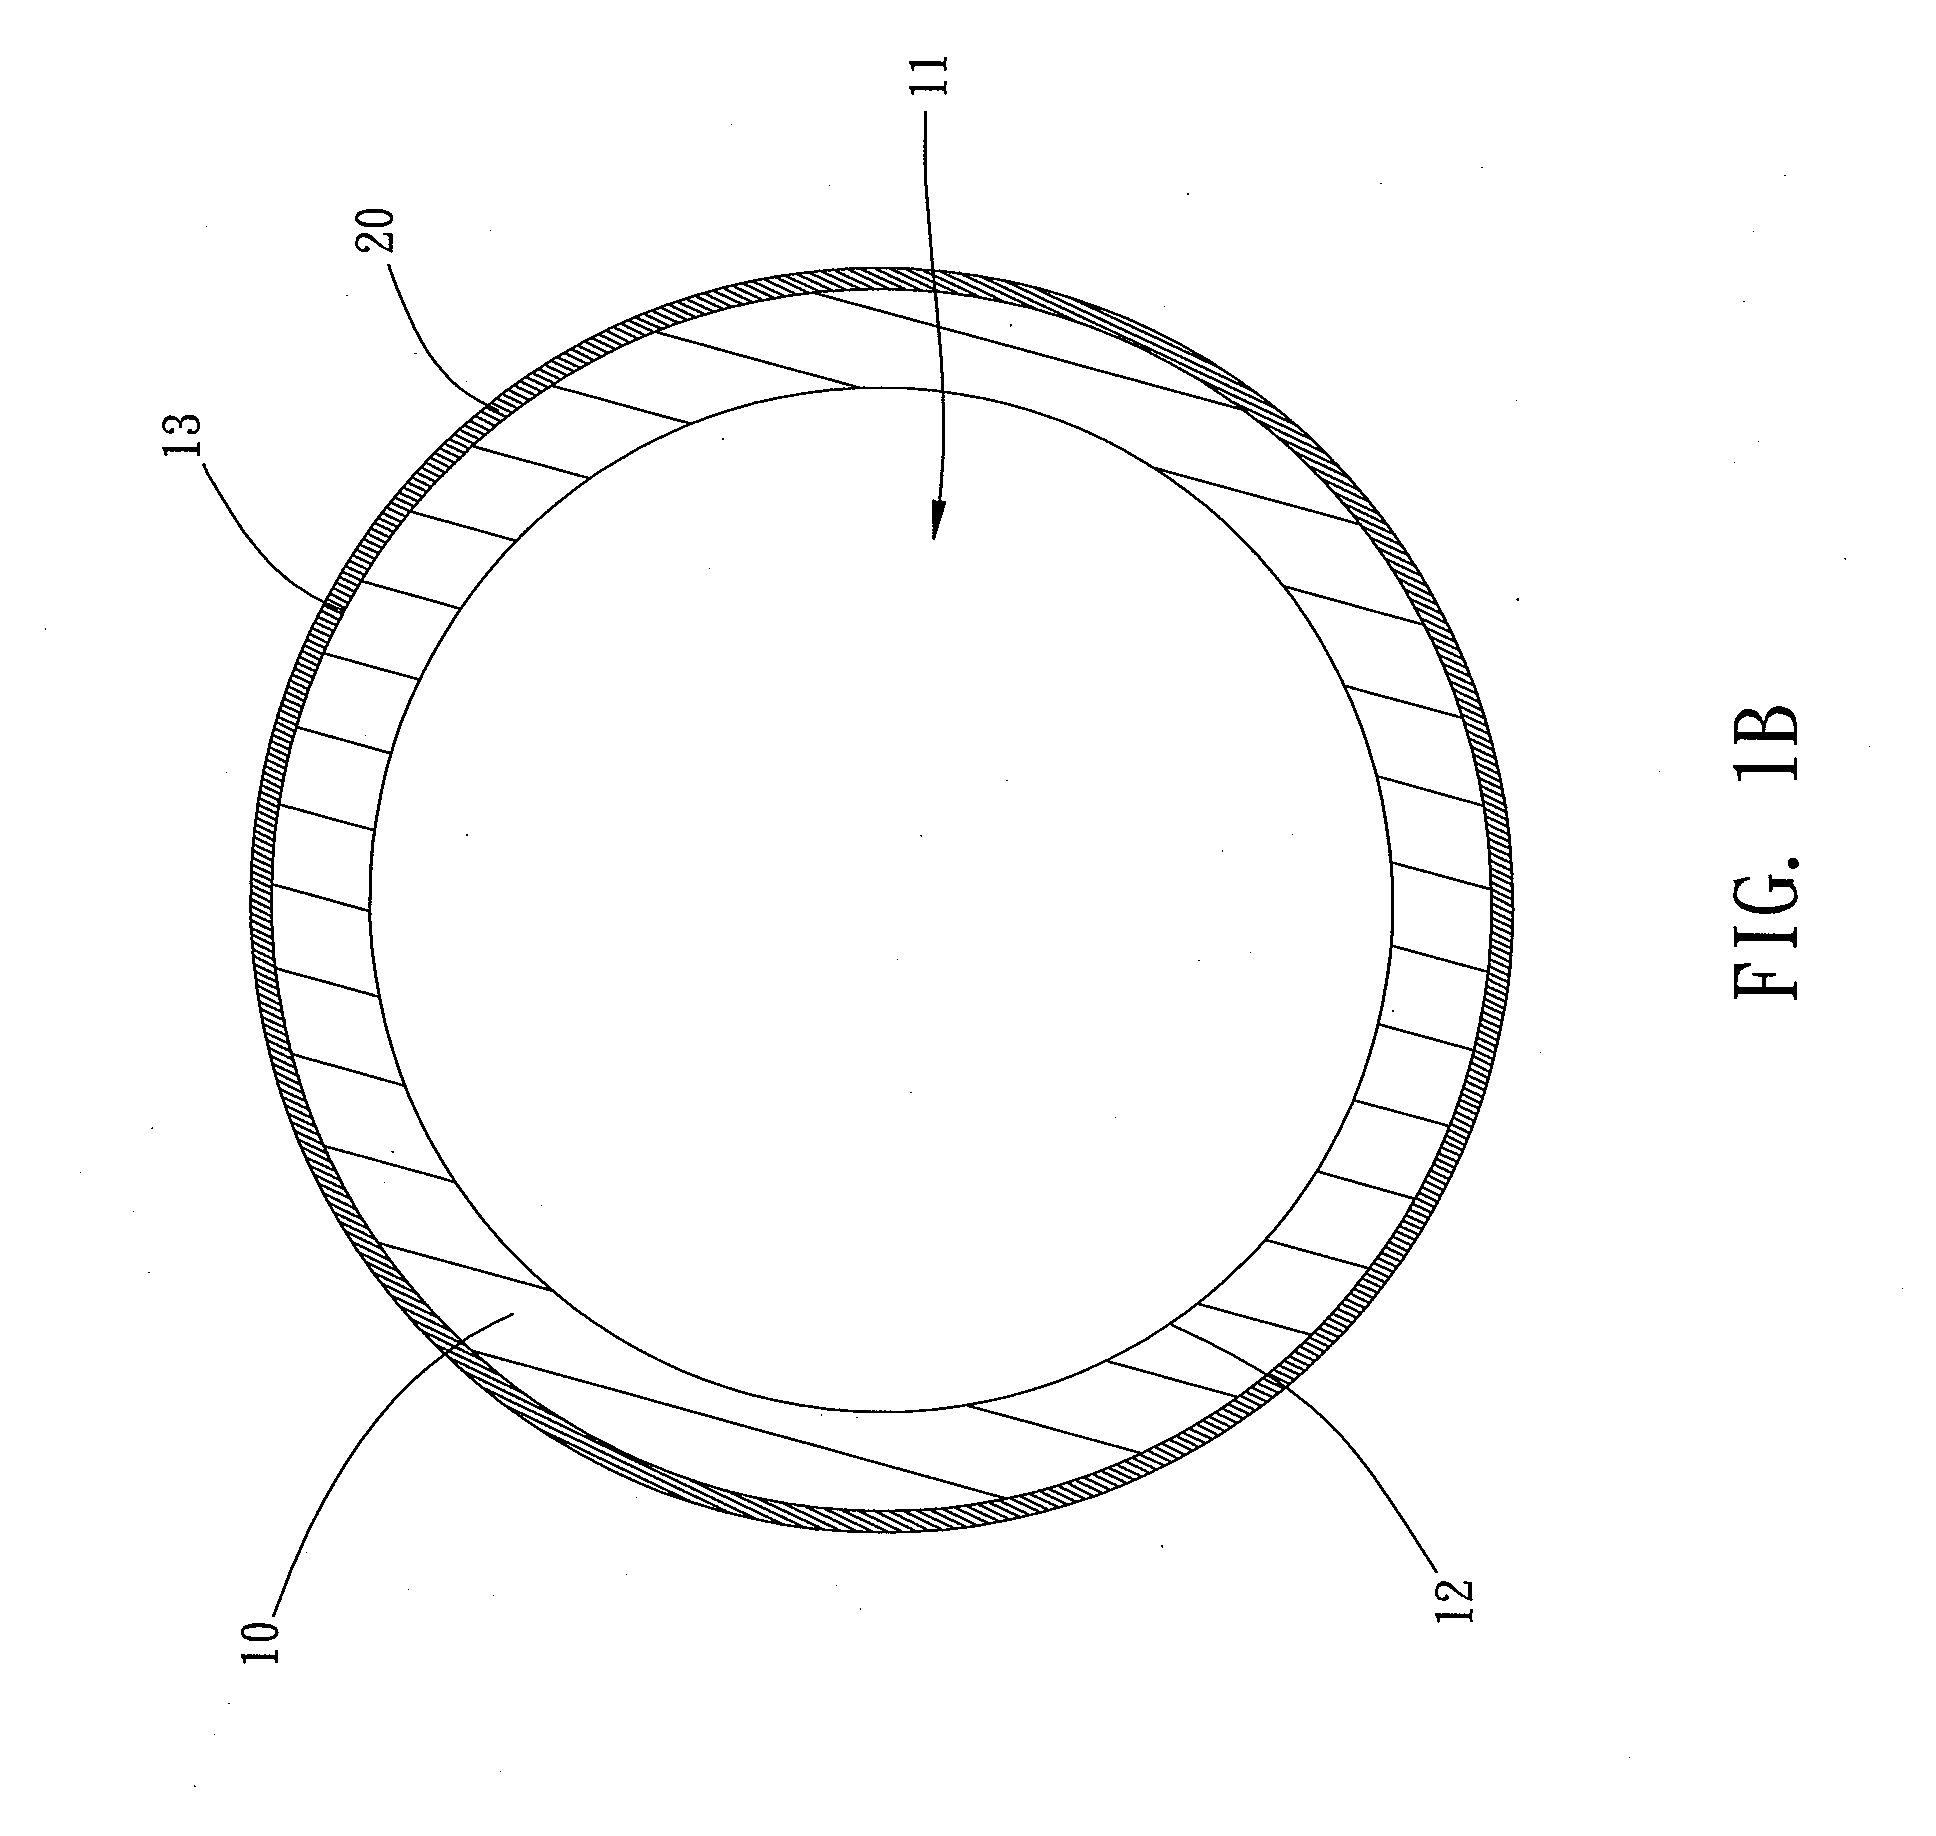 Method for fabricating exhaust gas decontamination reactor